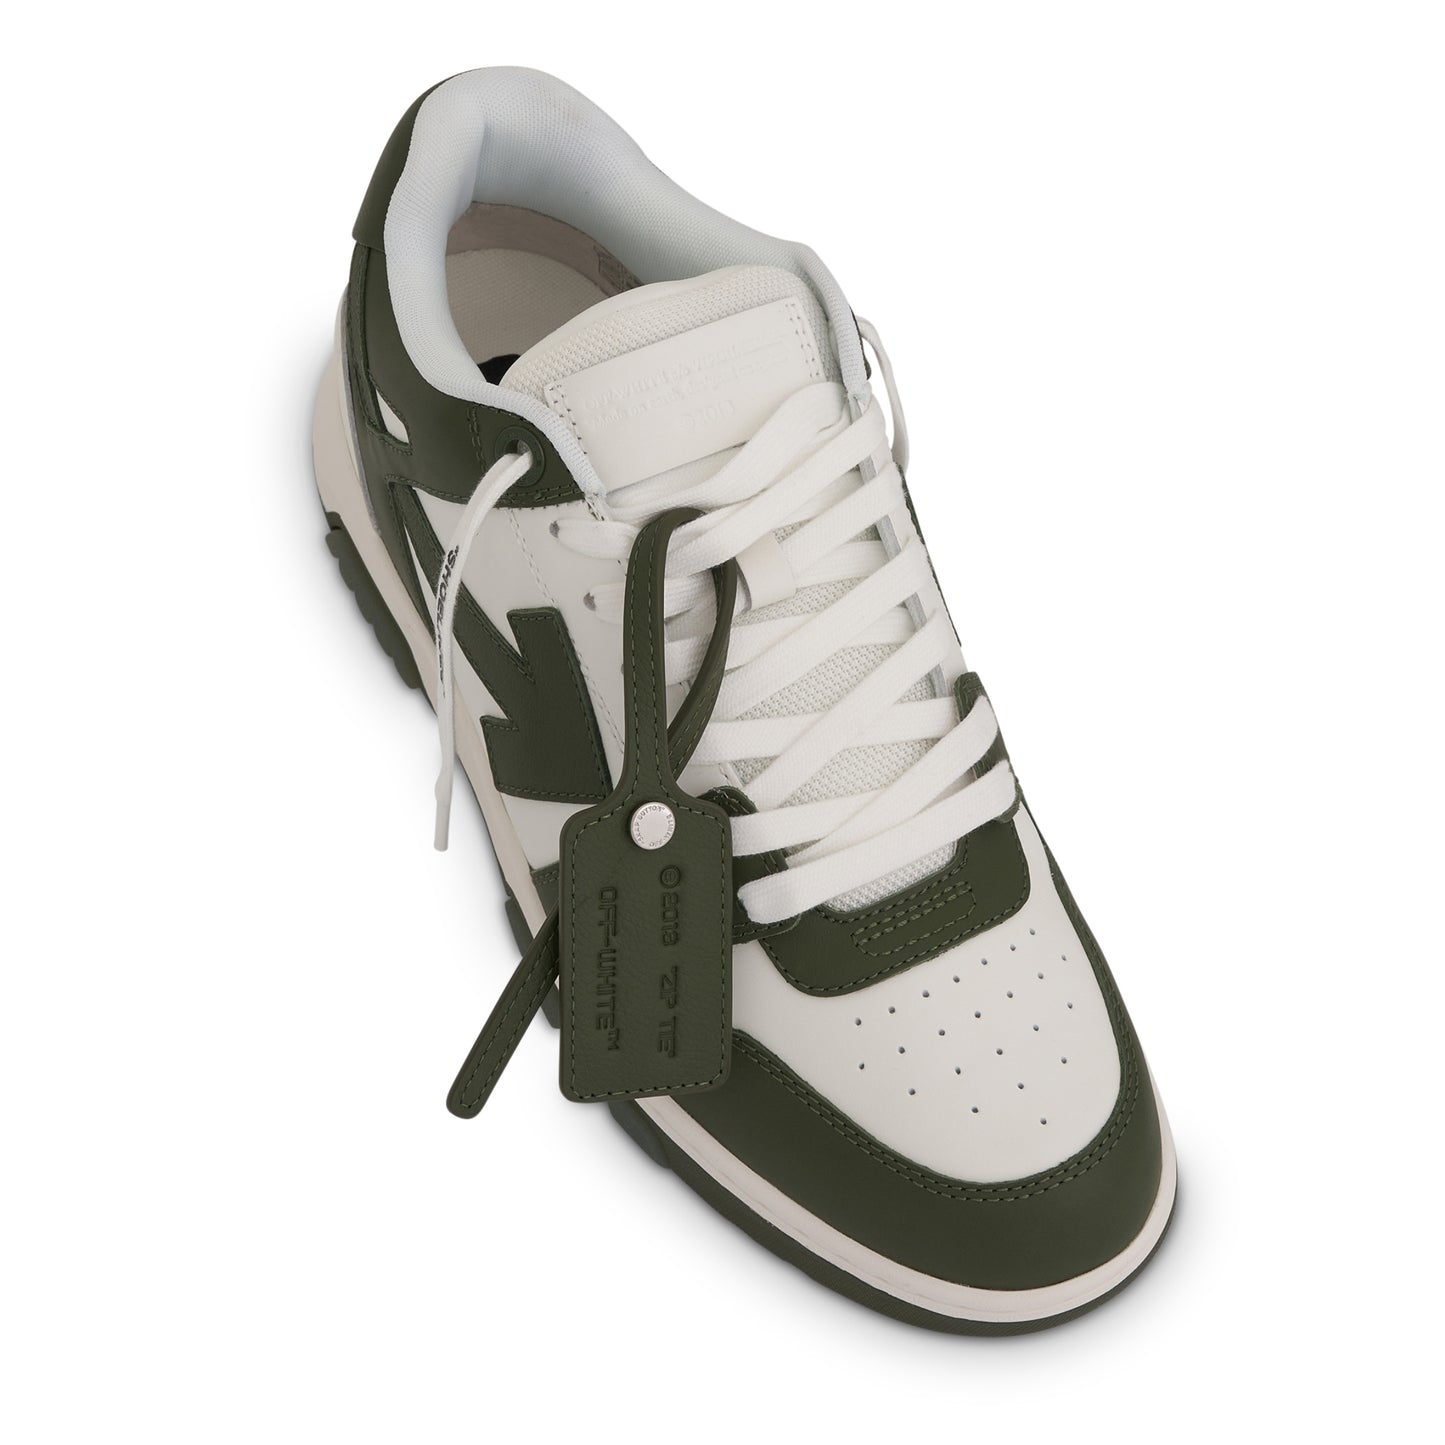 Out Of Office Calf Leather Sneaker in Dark Green/White